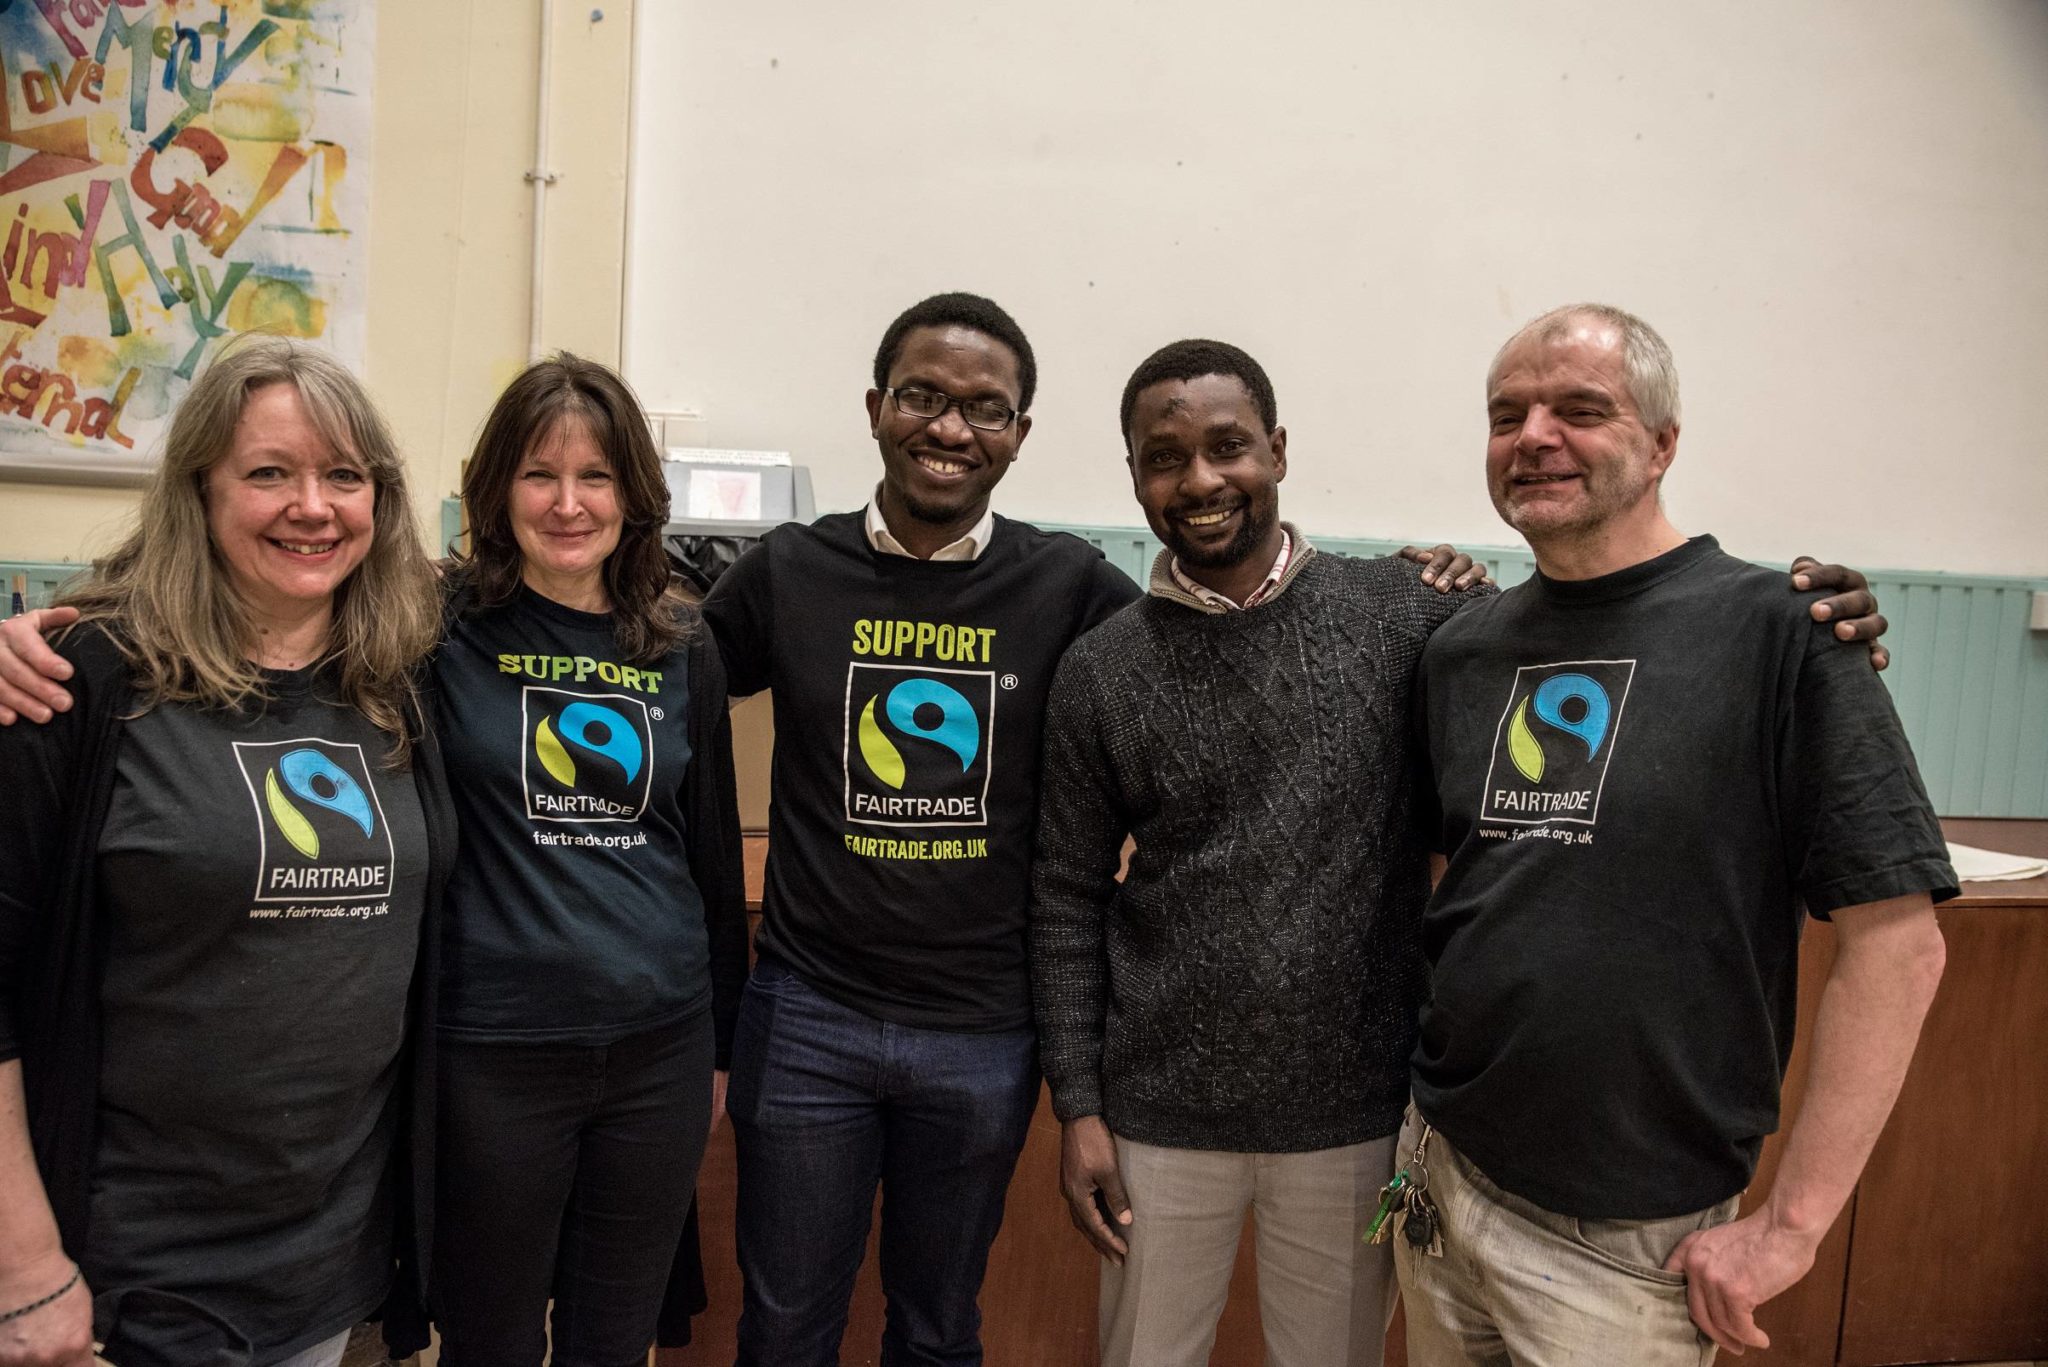 Decade of Fairtrade in the town is celebrated